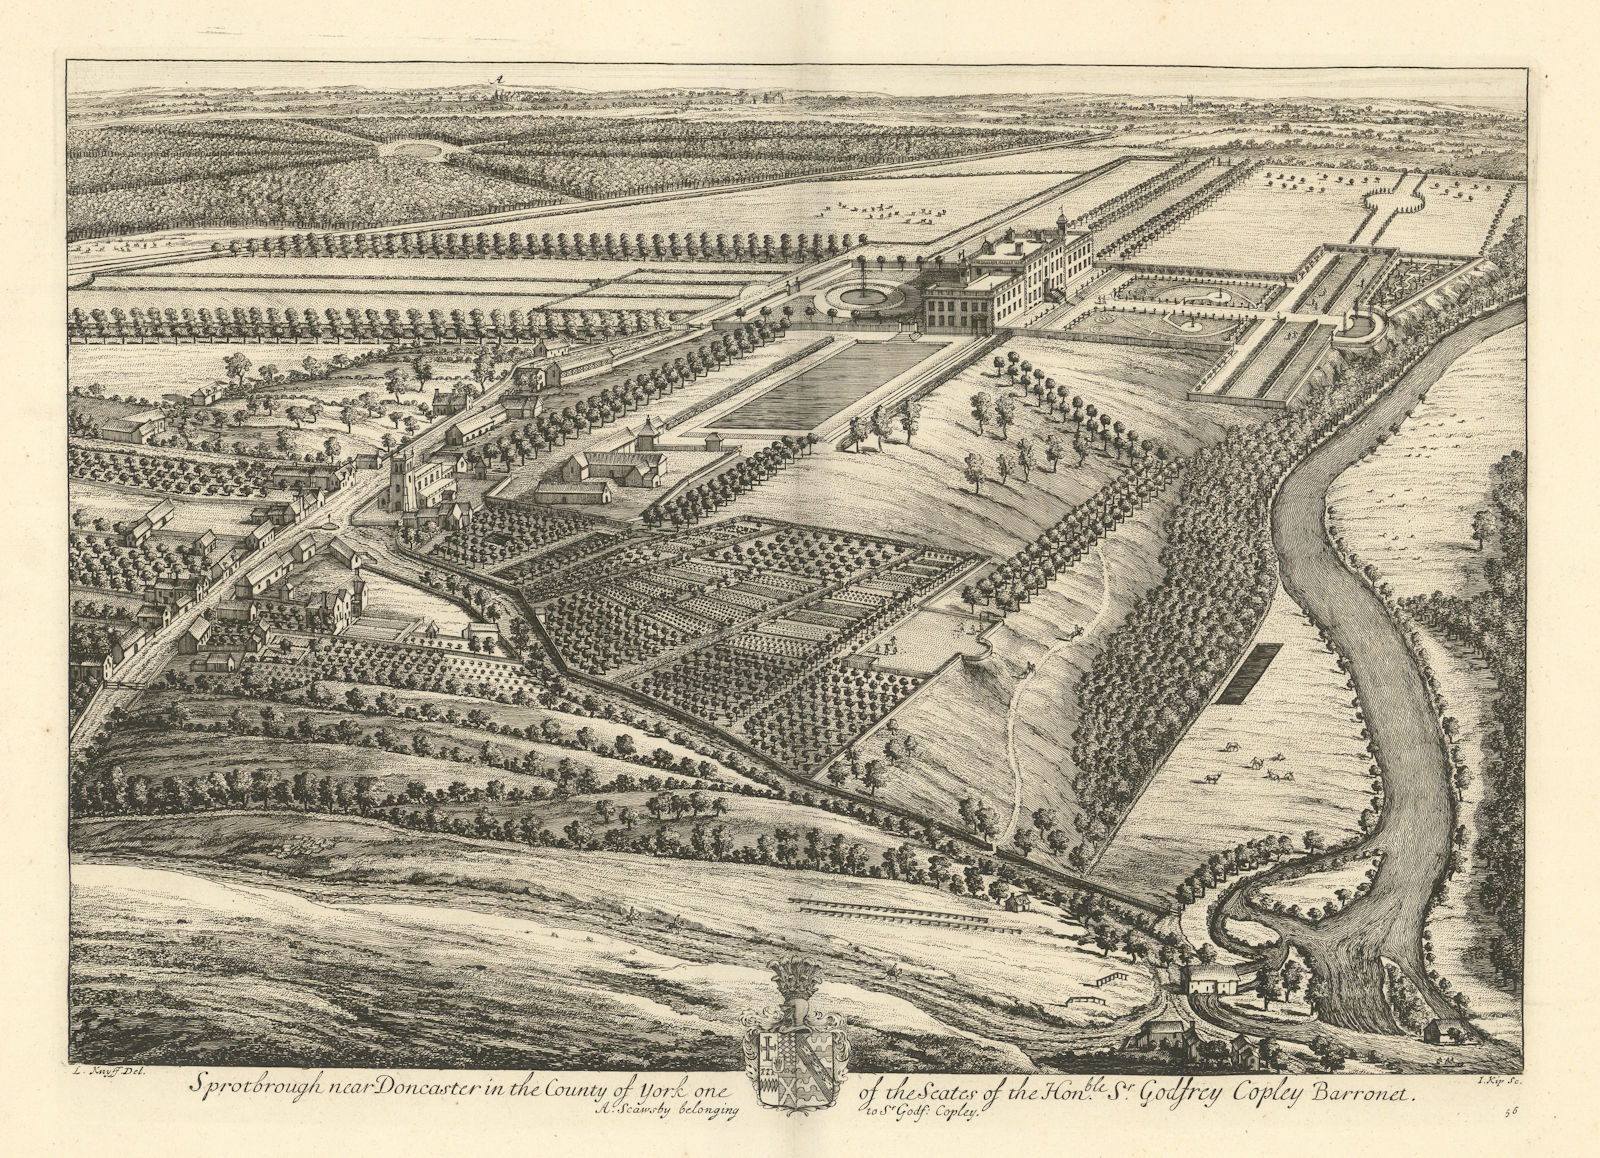 "Sprotbrough [Hall] near Doncaster in the County of York" by Kip & Knyff 1709